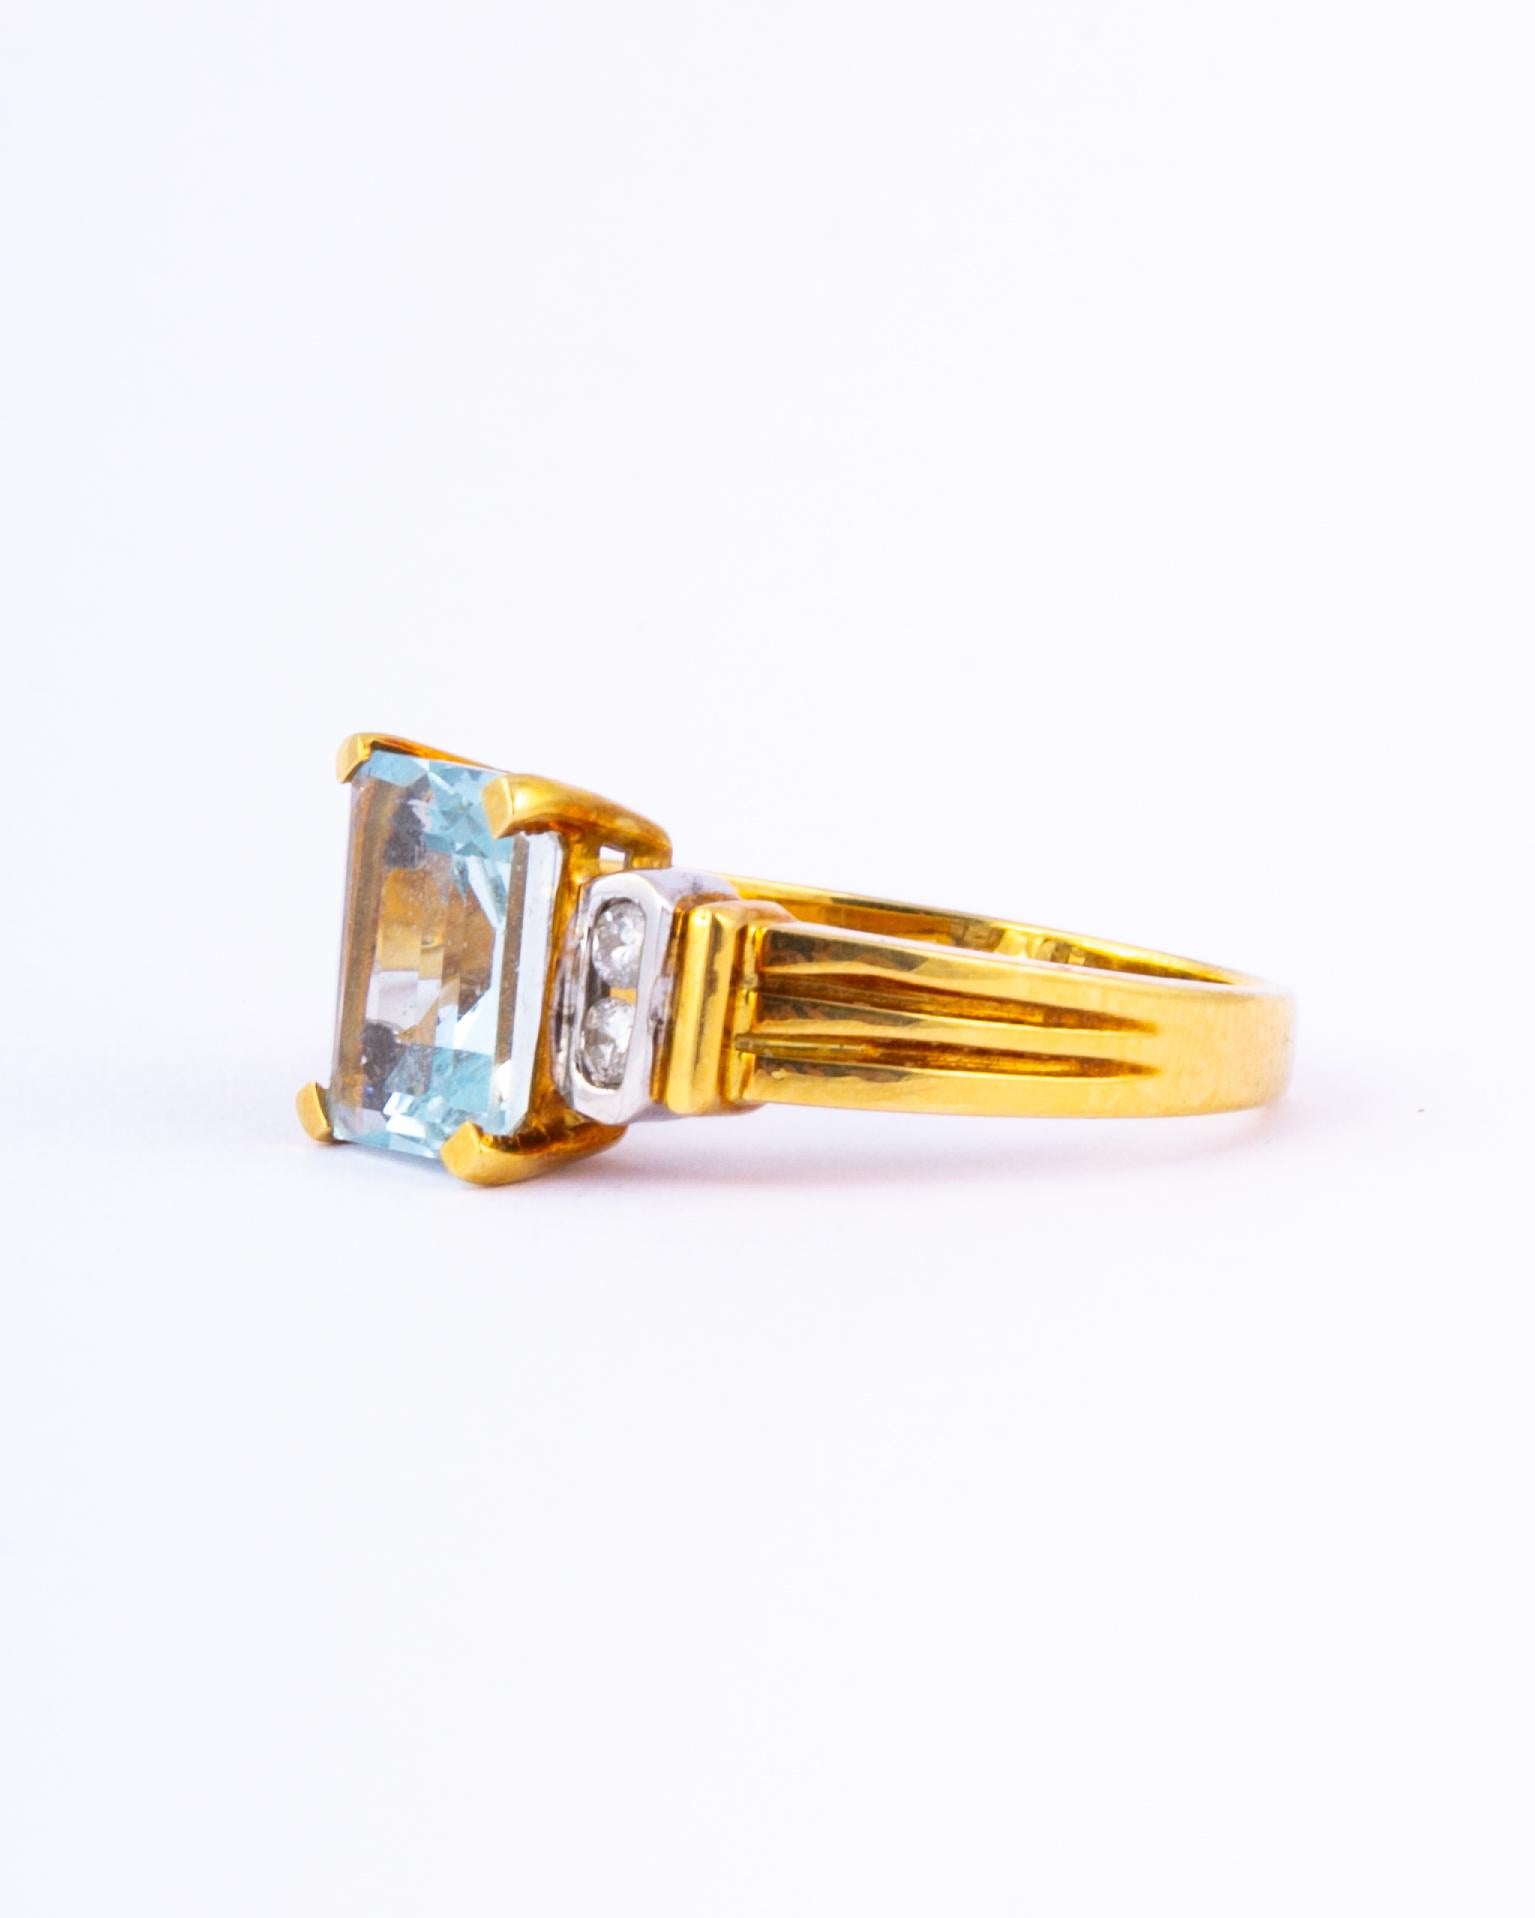 Set high in simple claws and gallery modelled in 18ct gold is the most stunning aqua stone. The aqua is a pale blue and is emerald cut which reflects the light beautifully. Either side of this stone sits a pair of diamonds measuring a total of 5pts